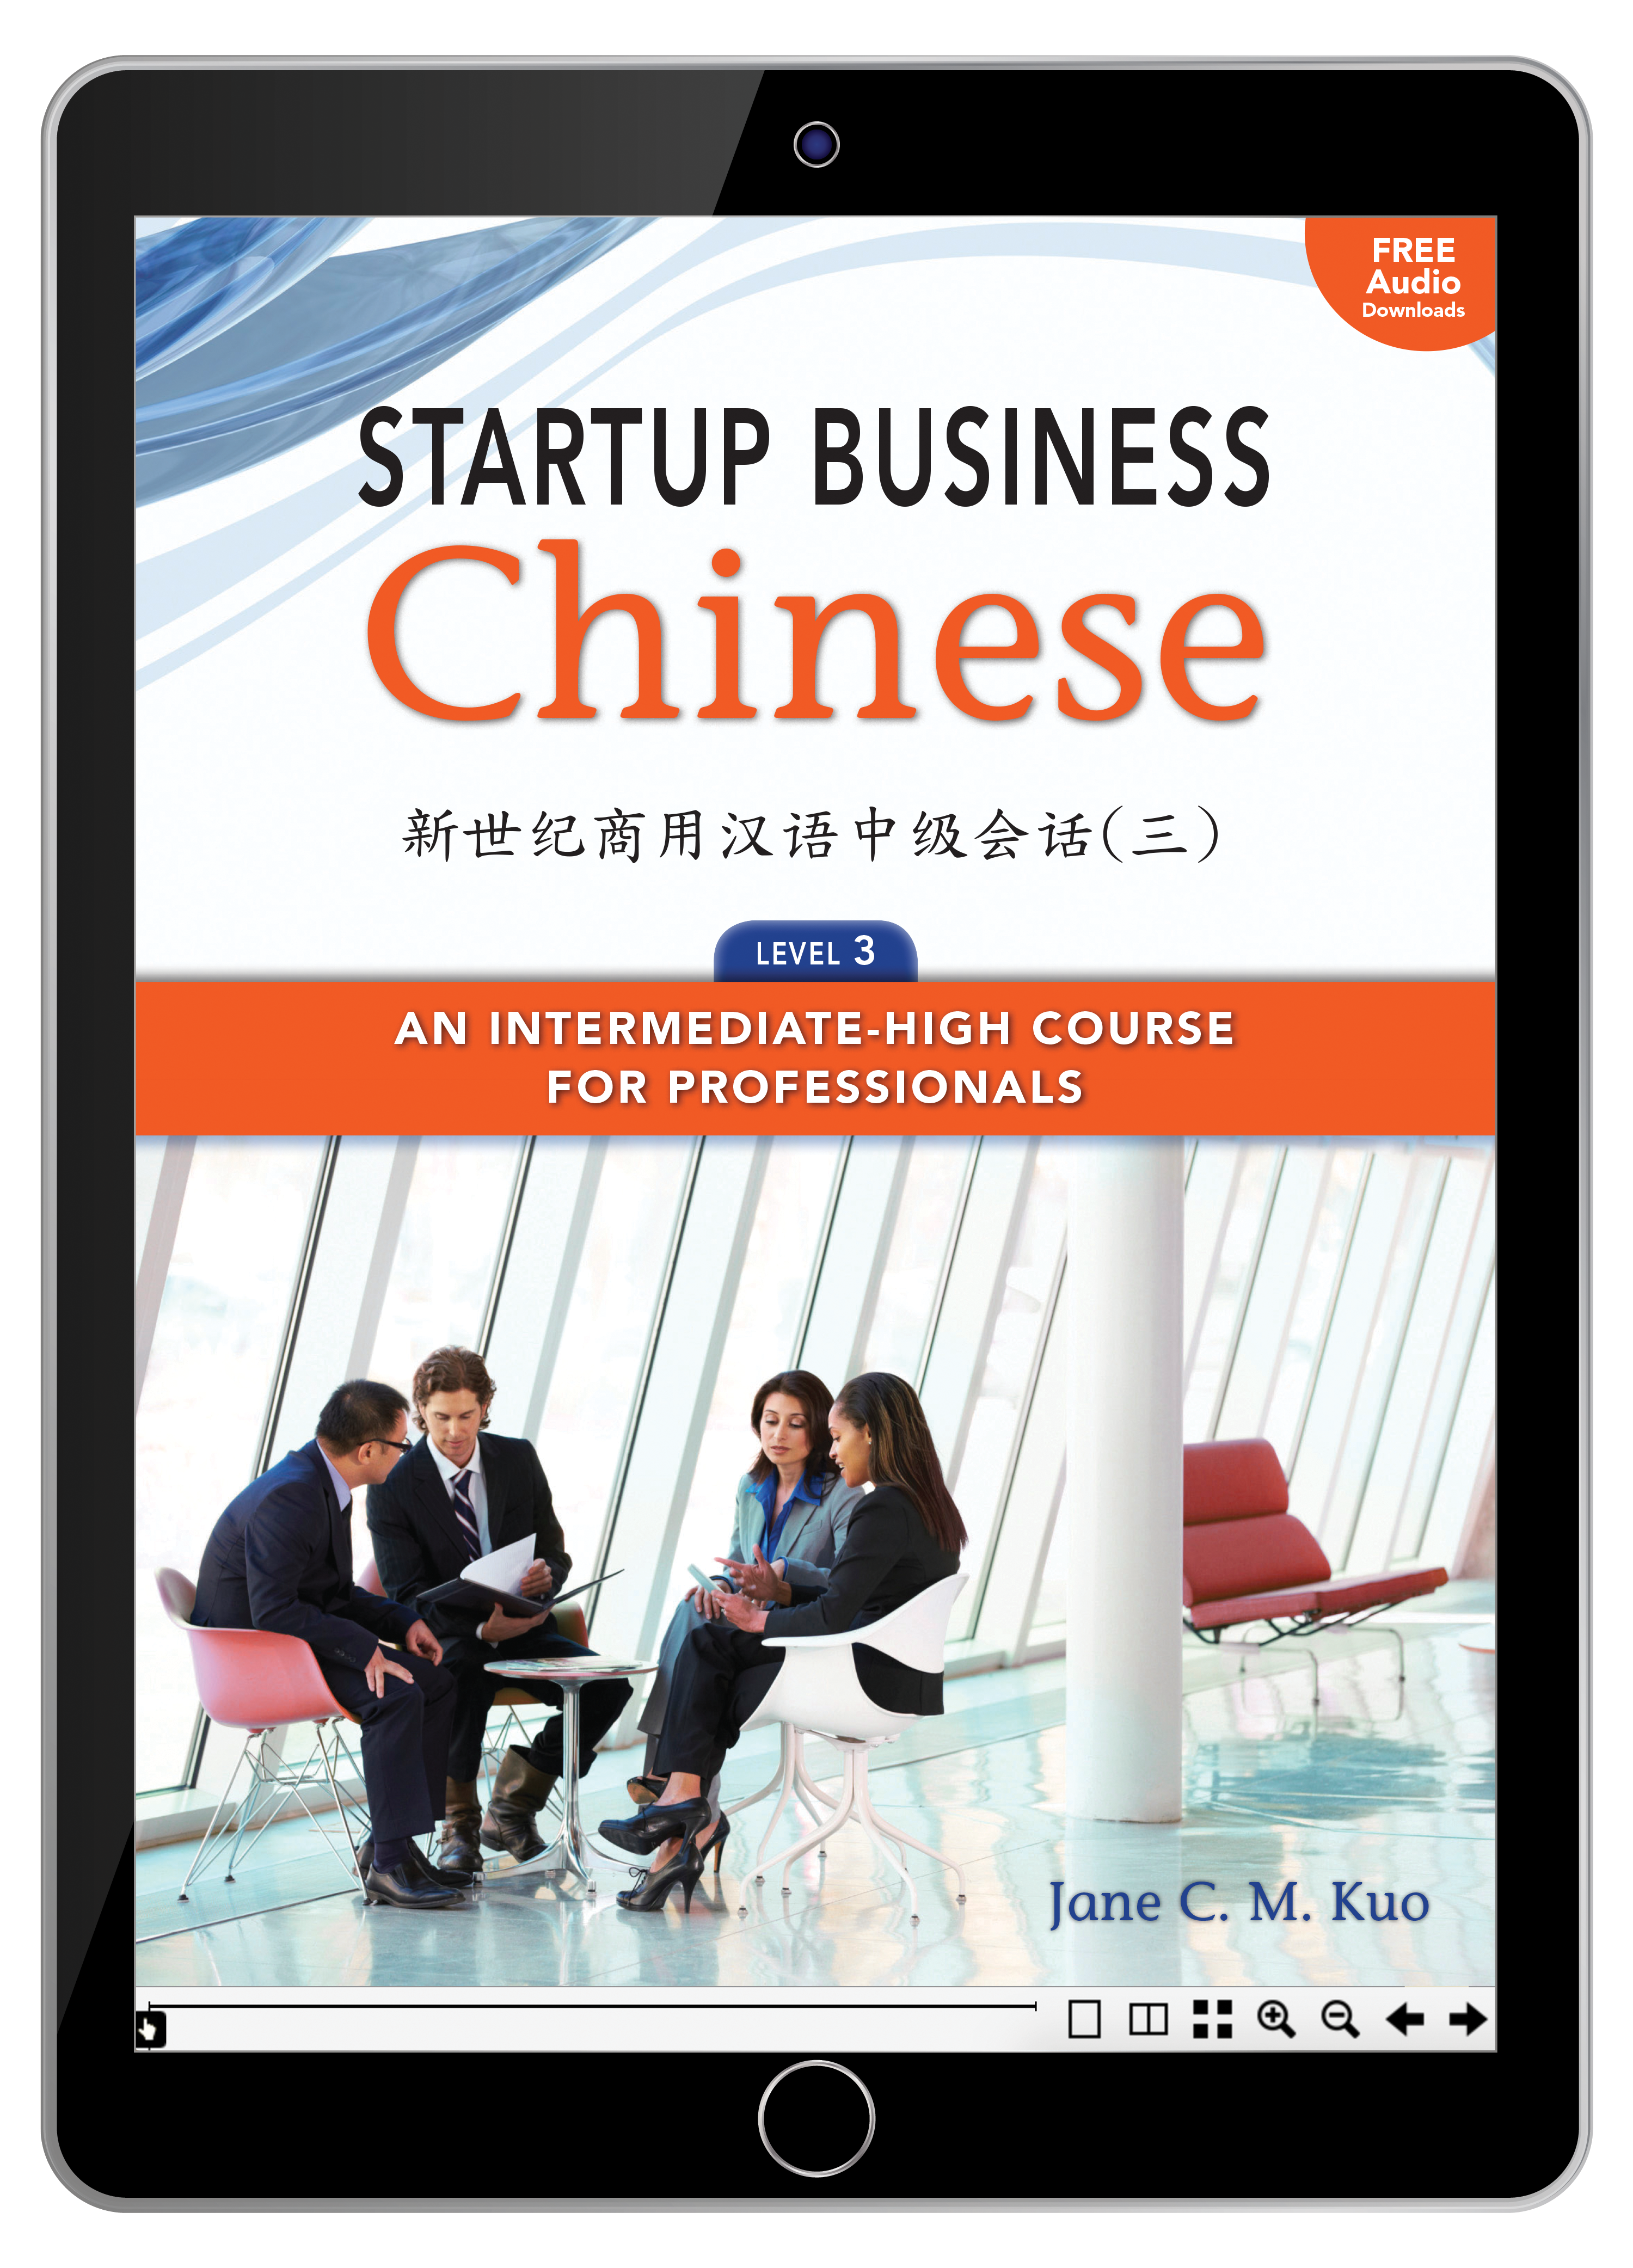 Startup Business Chinese Level 3 eBook Cover